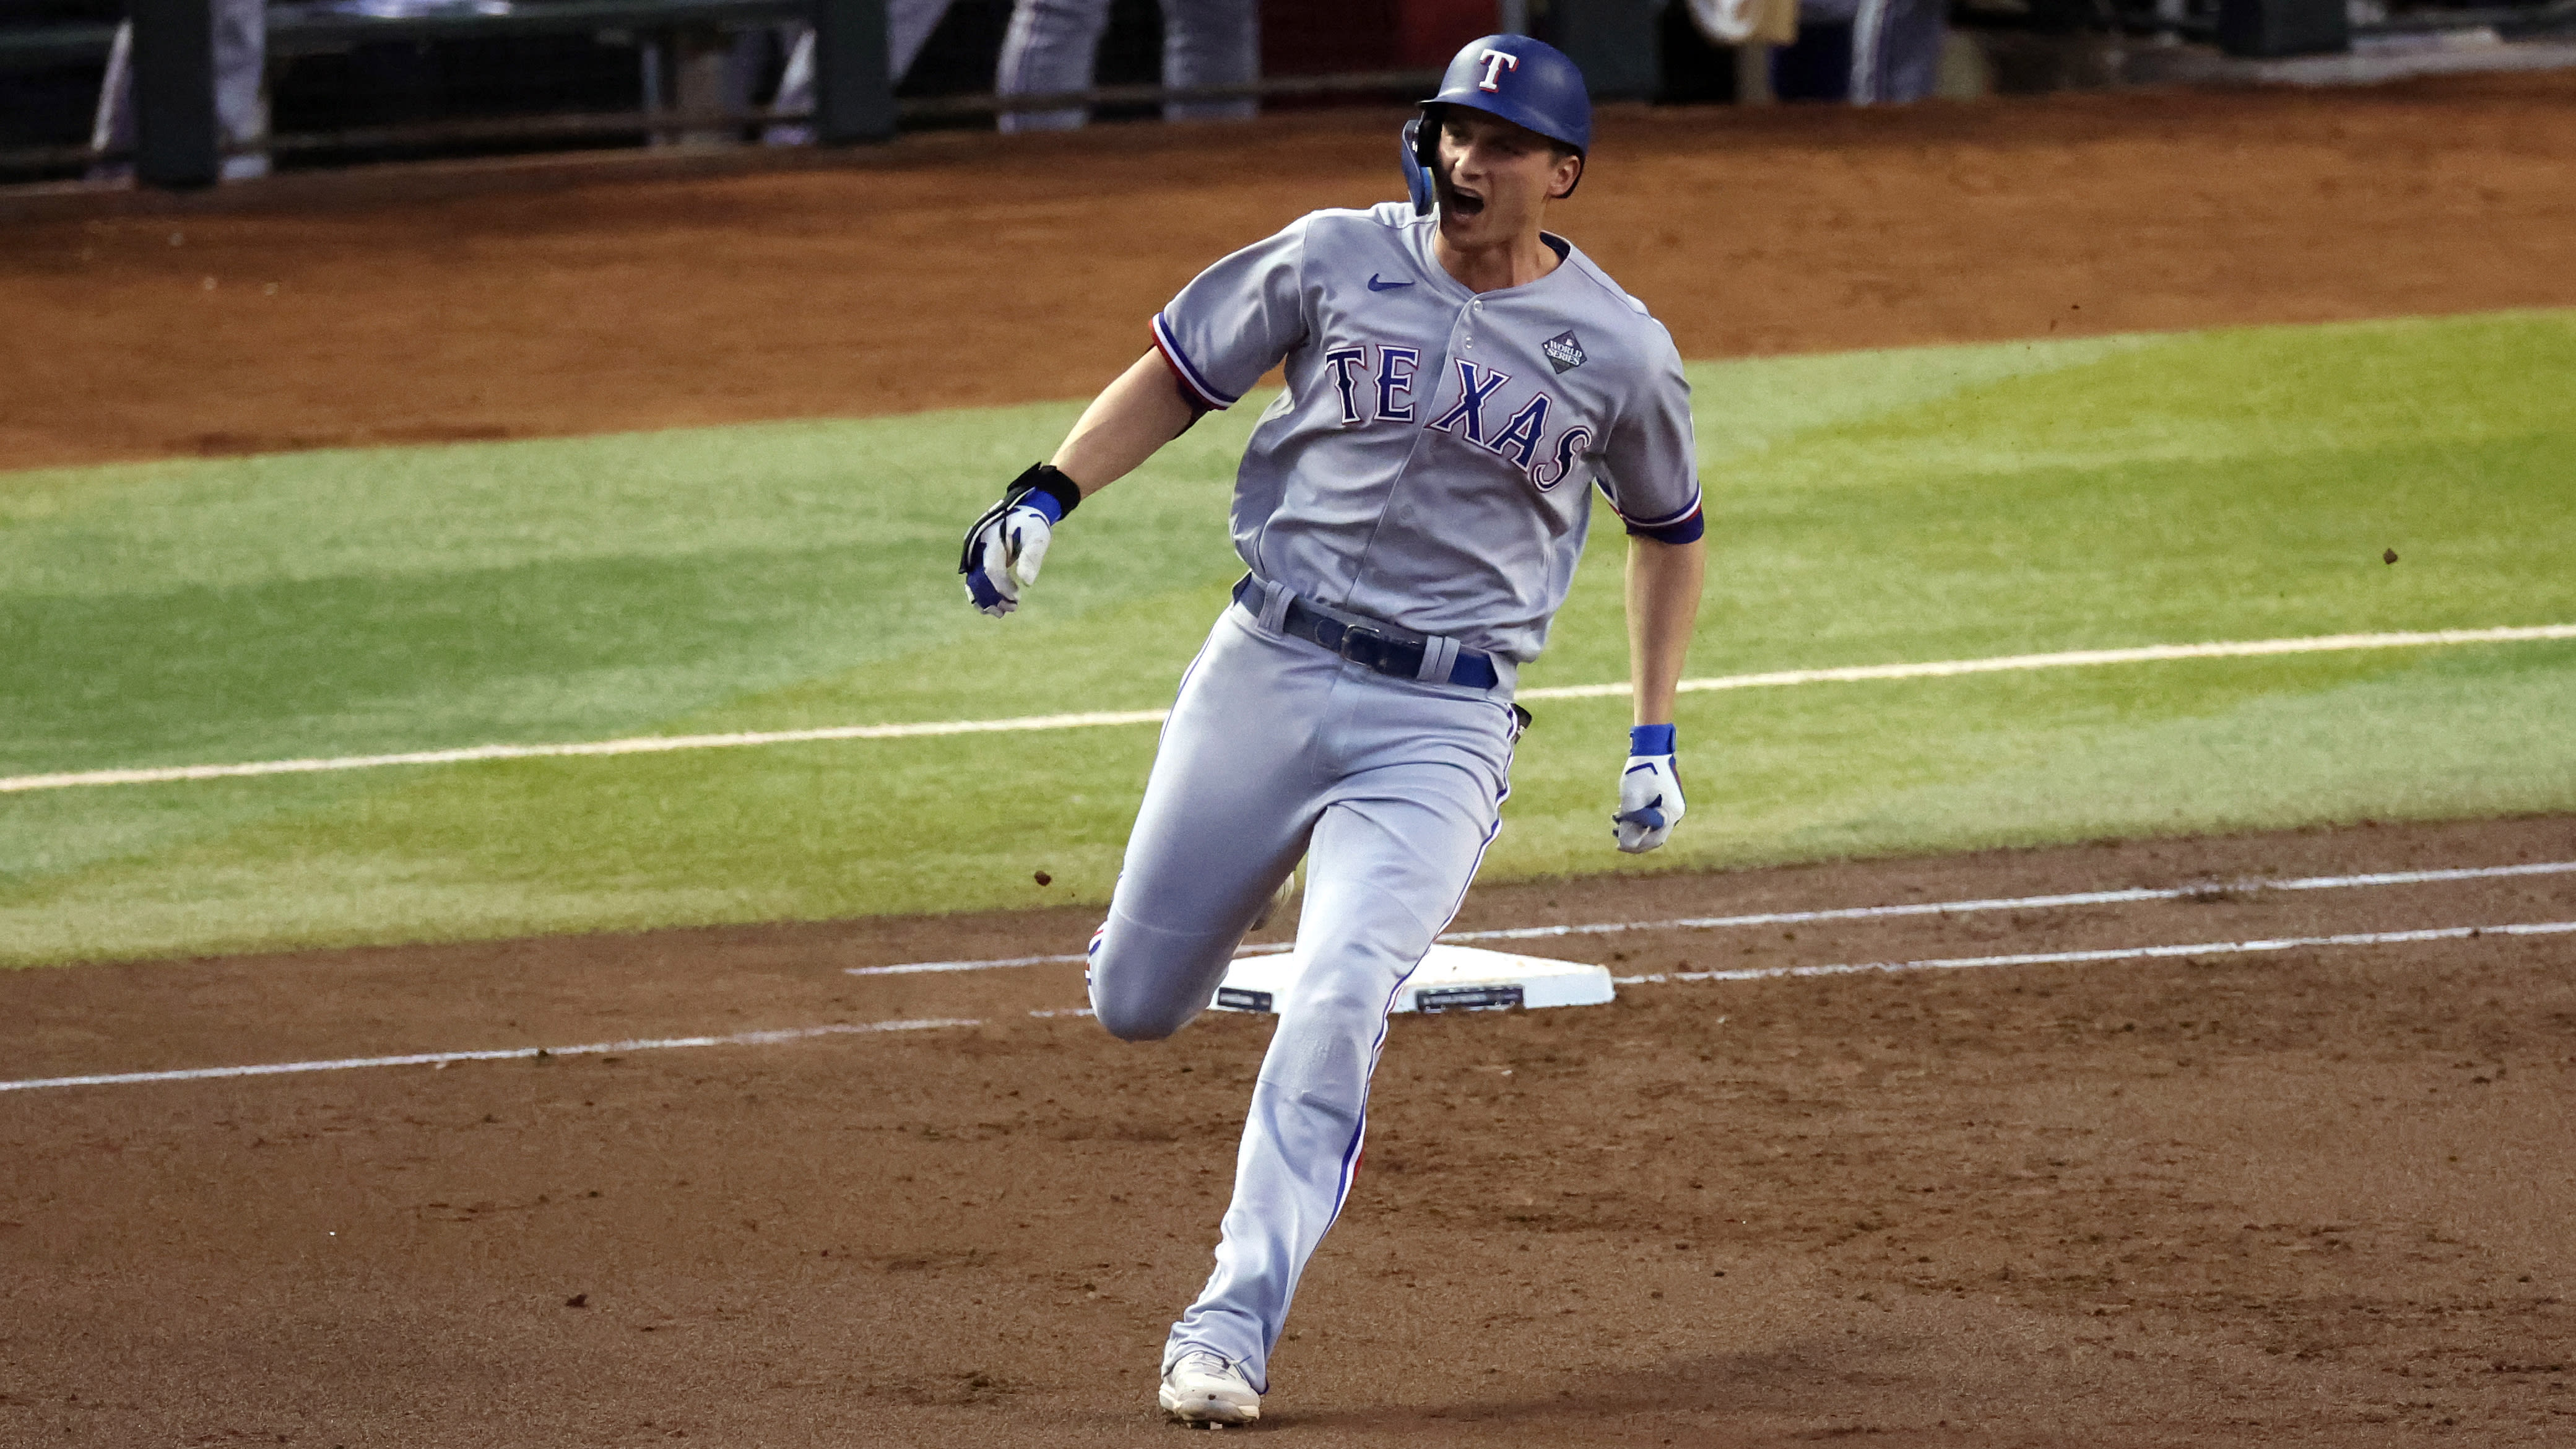 Corey Seager rounds first base after his Game 4 home run